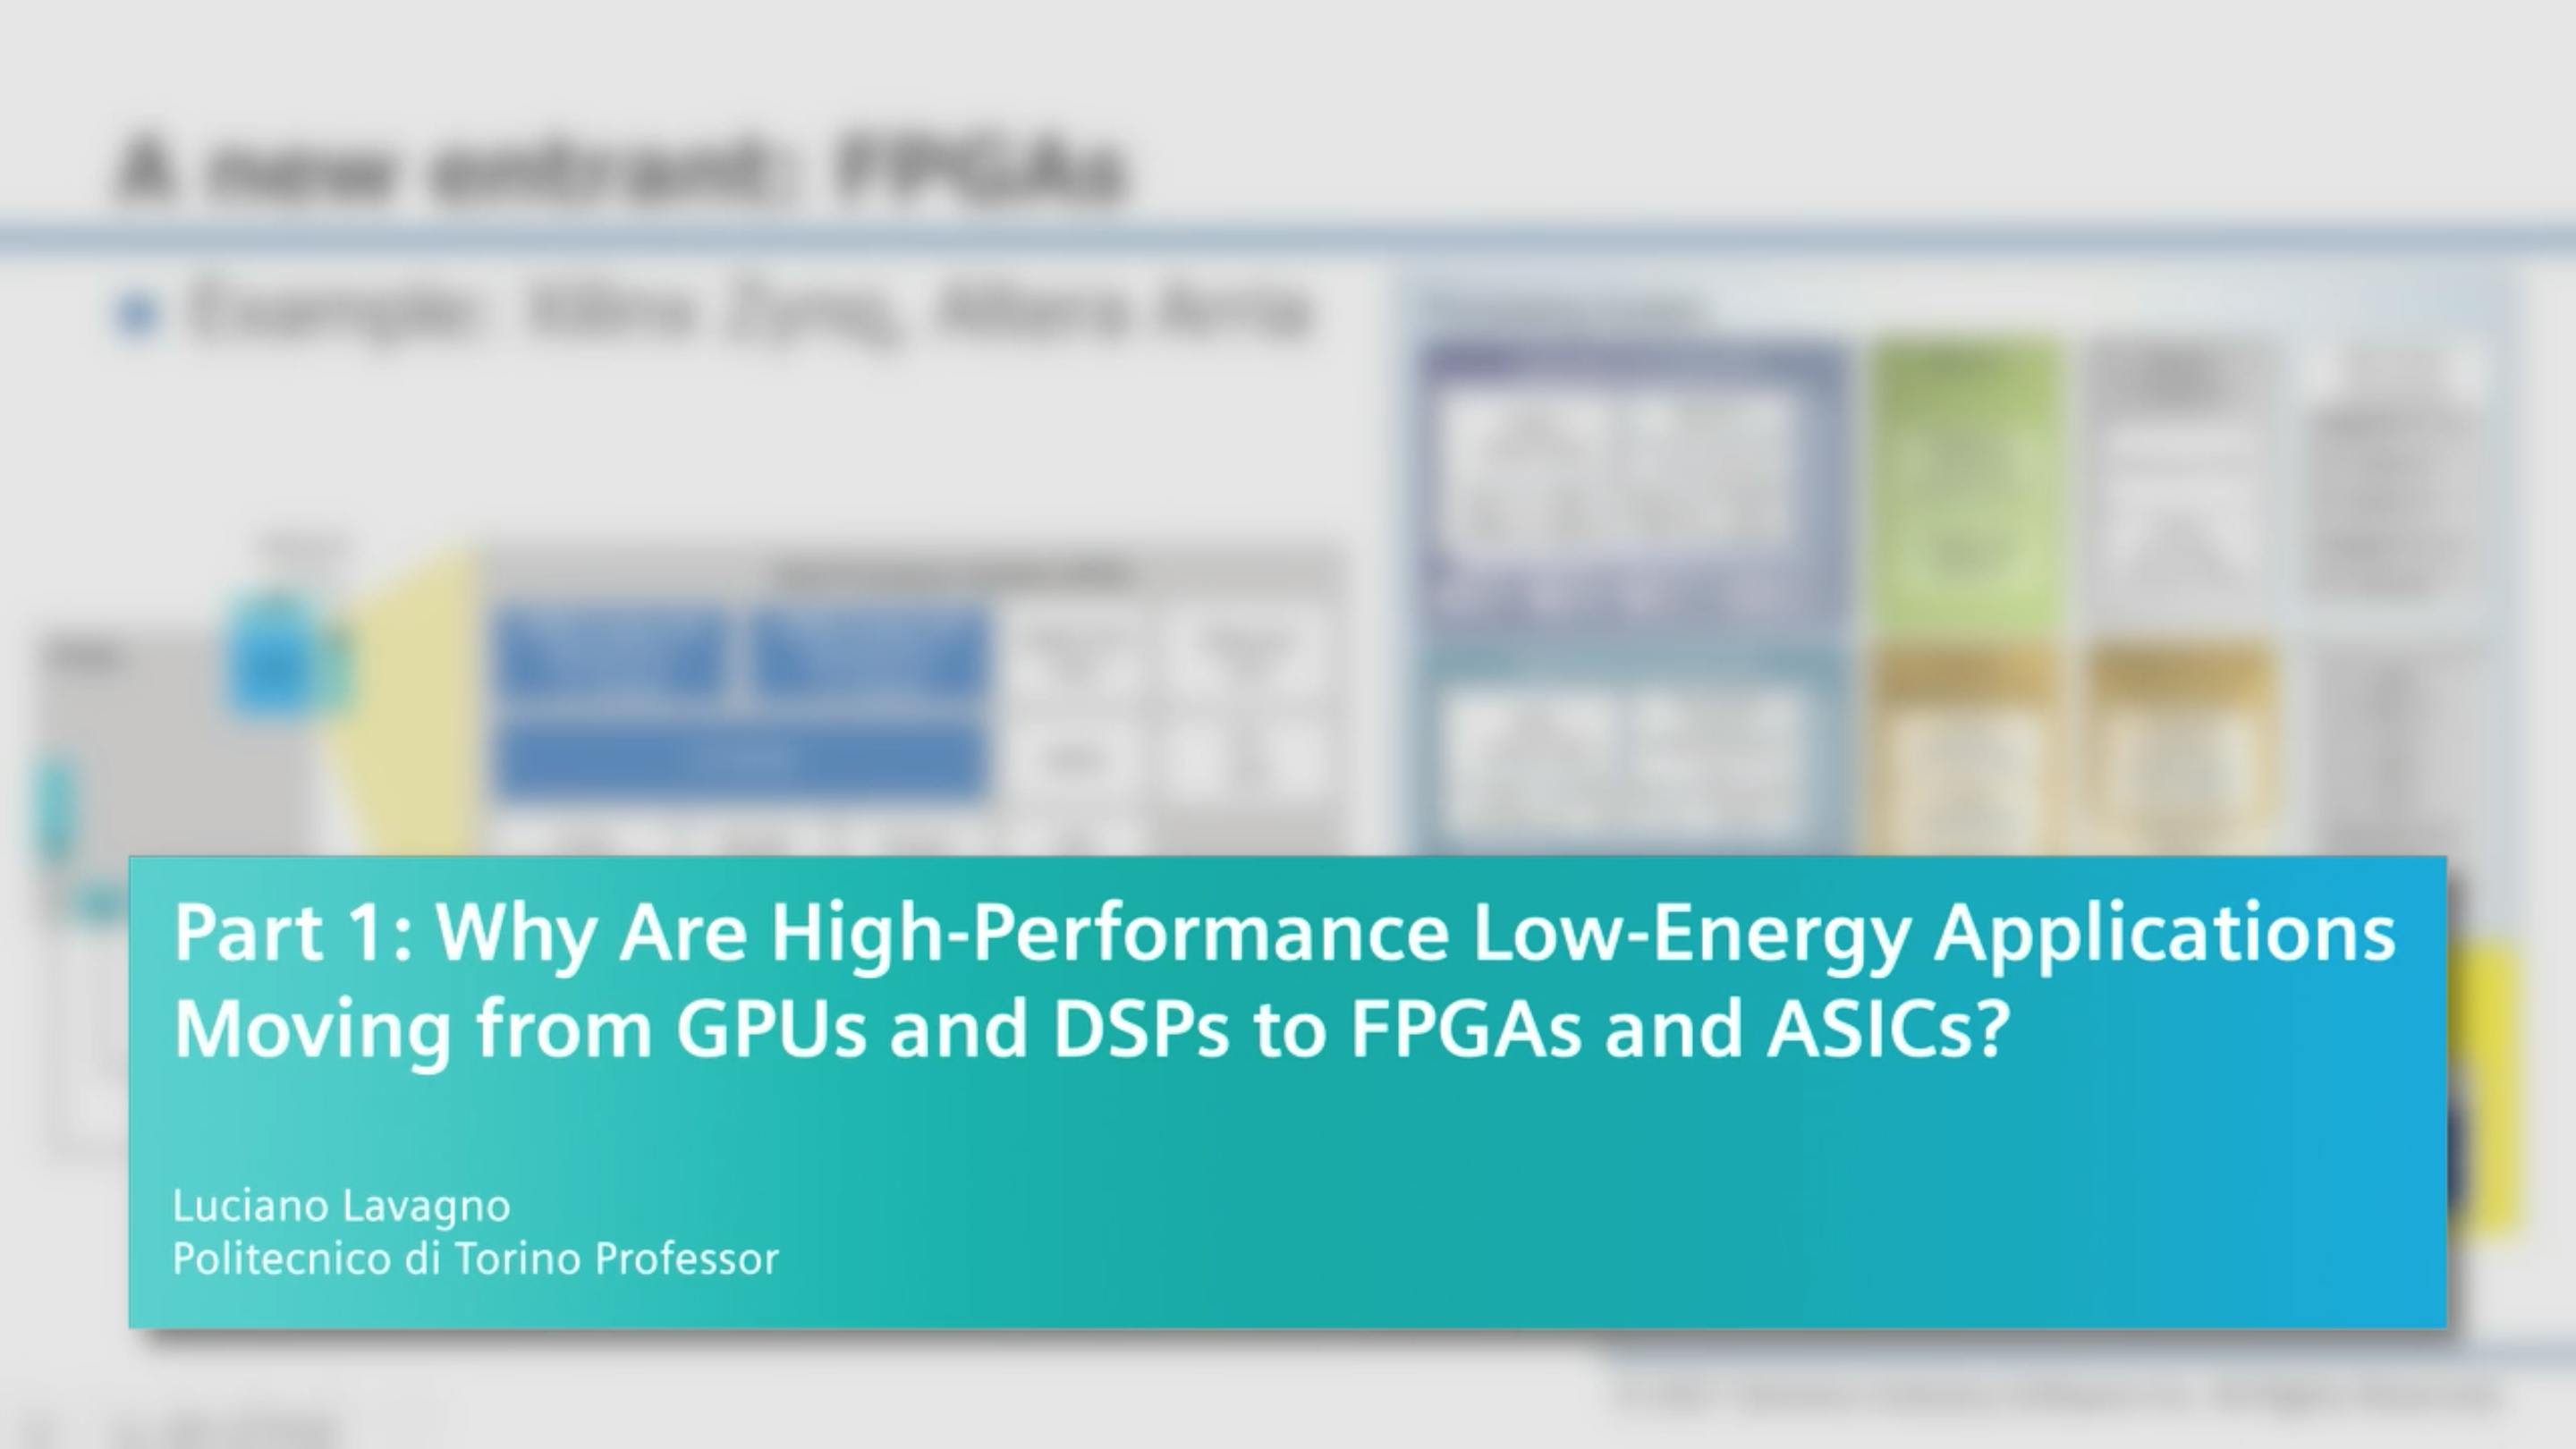 Part 1: Why Are High-Performance Low-Energy Applications Moving from GPUs and DSPs to FPGAs and ASICs?